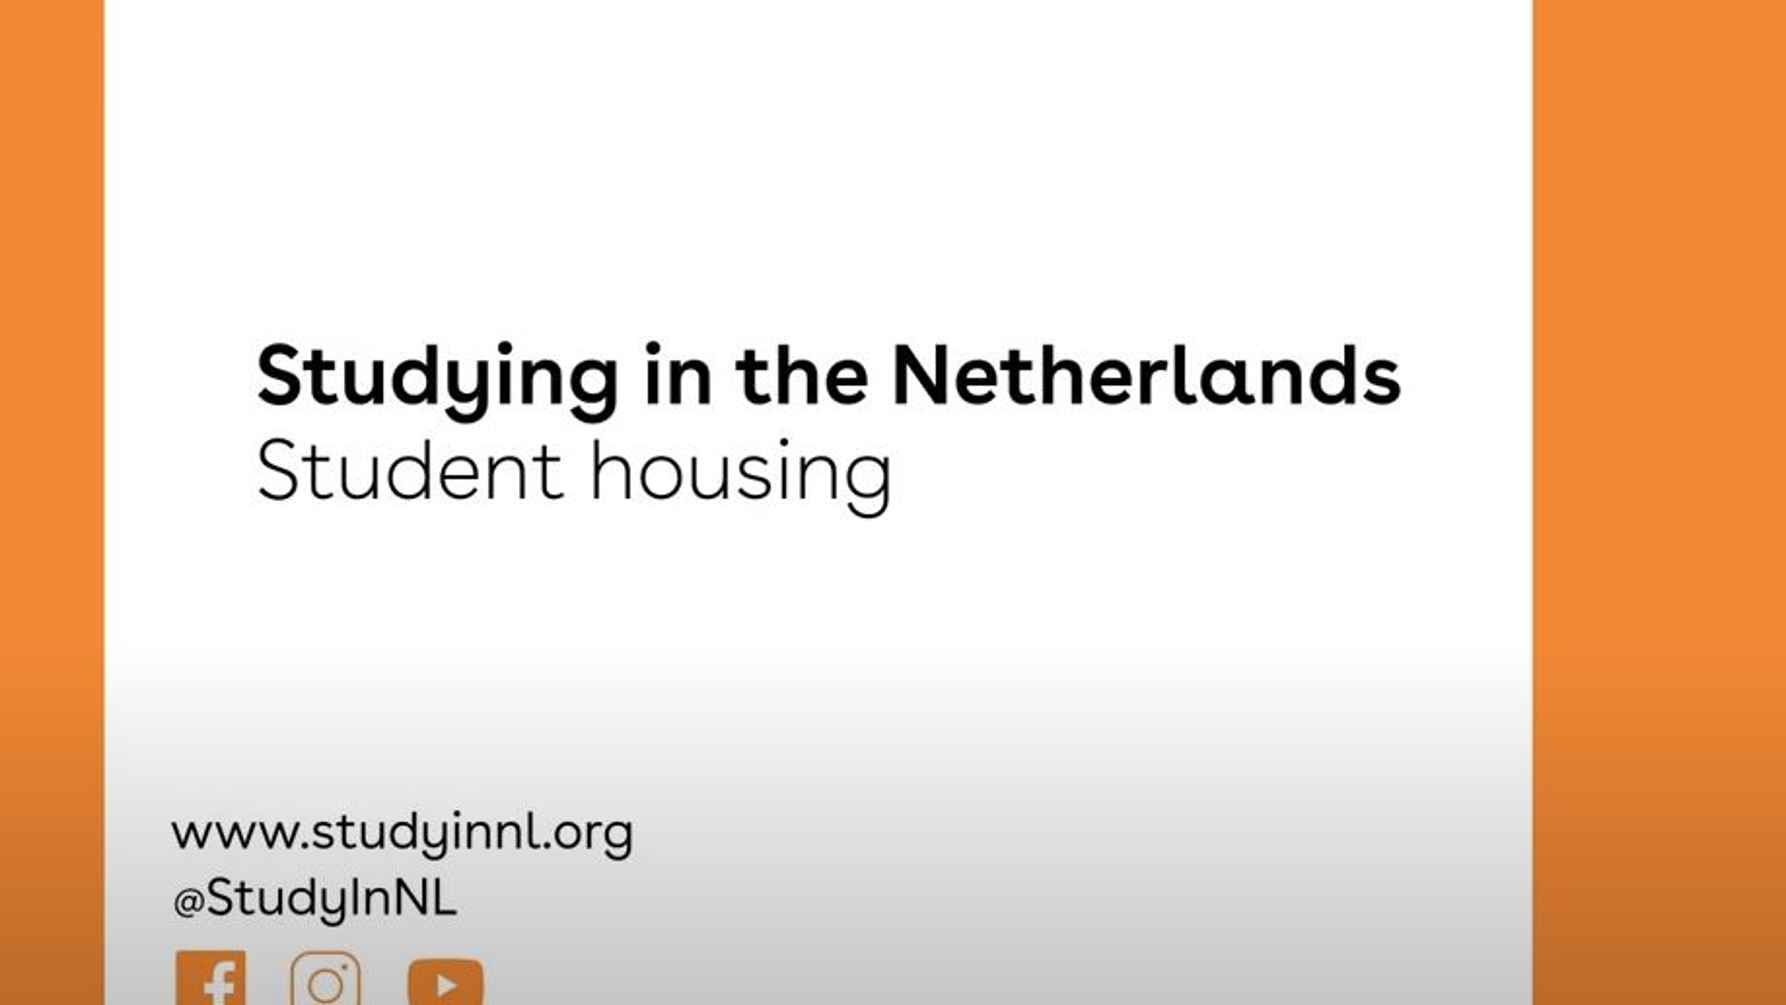 Student housing in the Netherlands